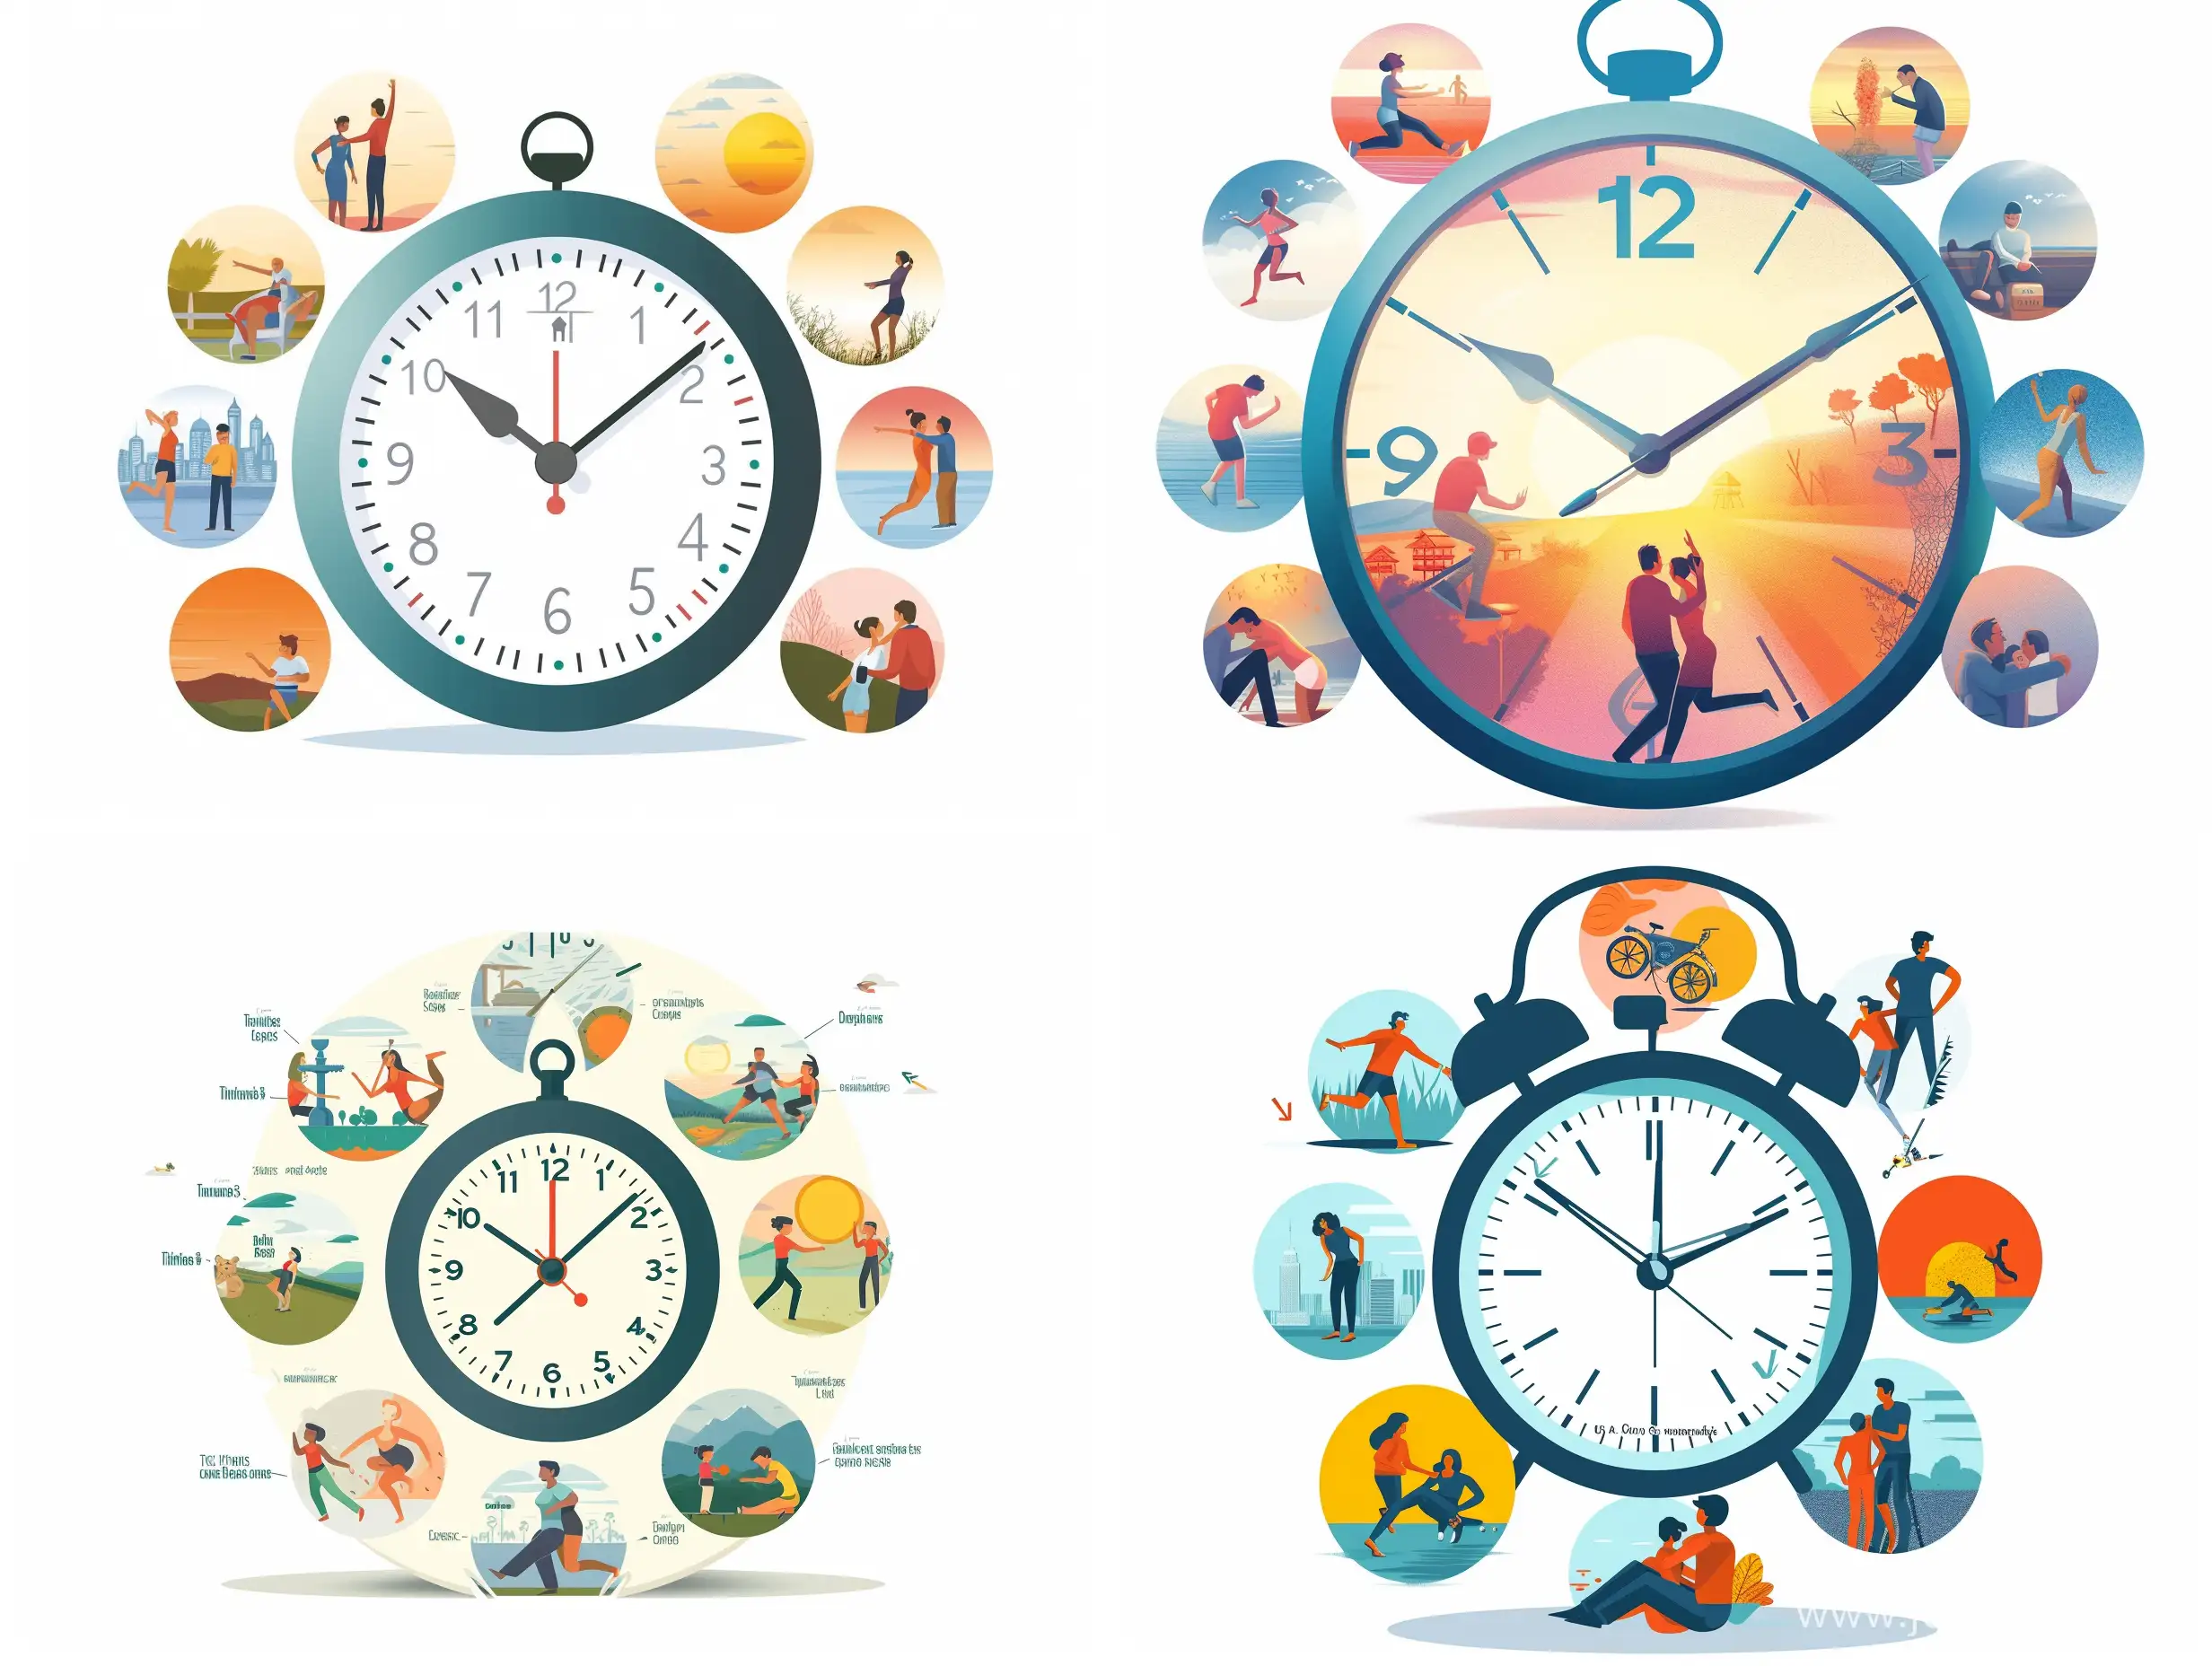 Timeliness-Illustrated-Clock-of-Health-Love-Decisions-and-Assistance